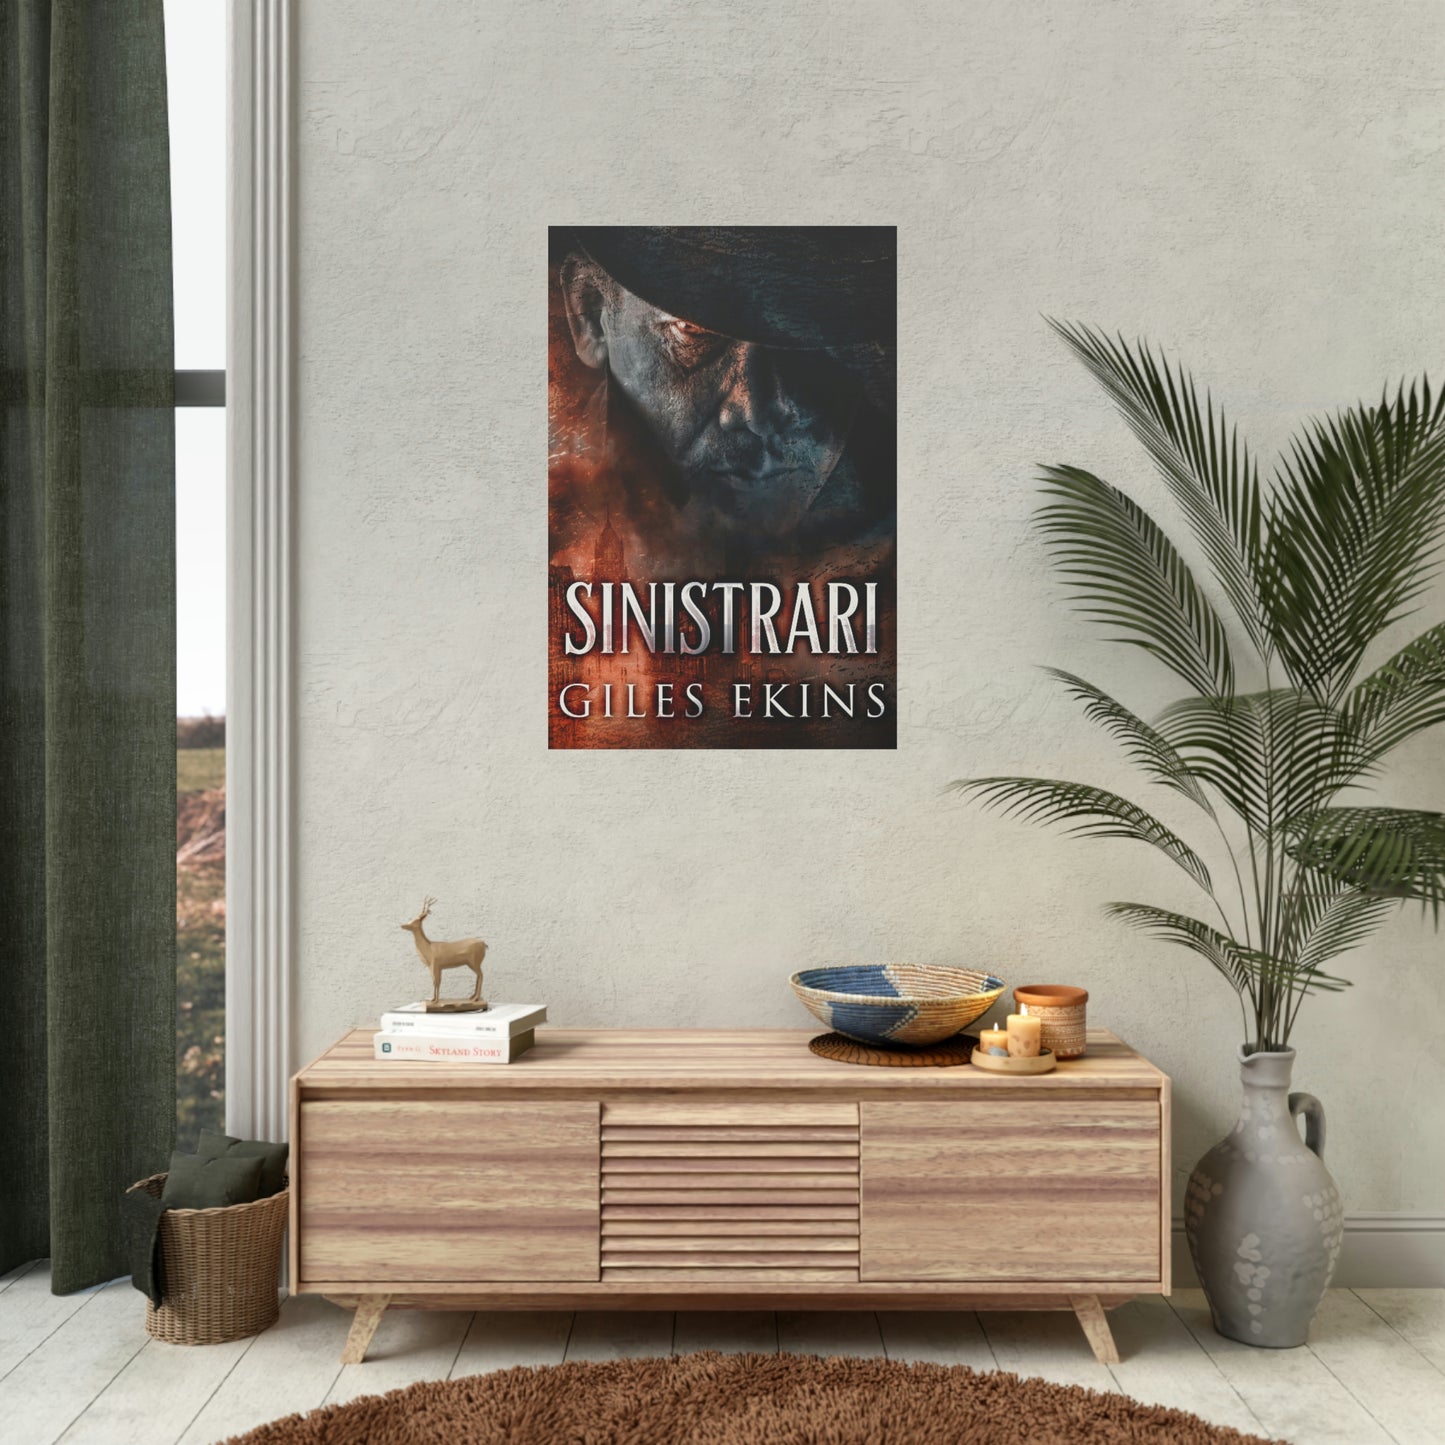 Sinistrari - Rolled Poster